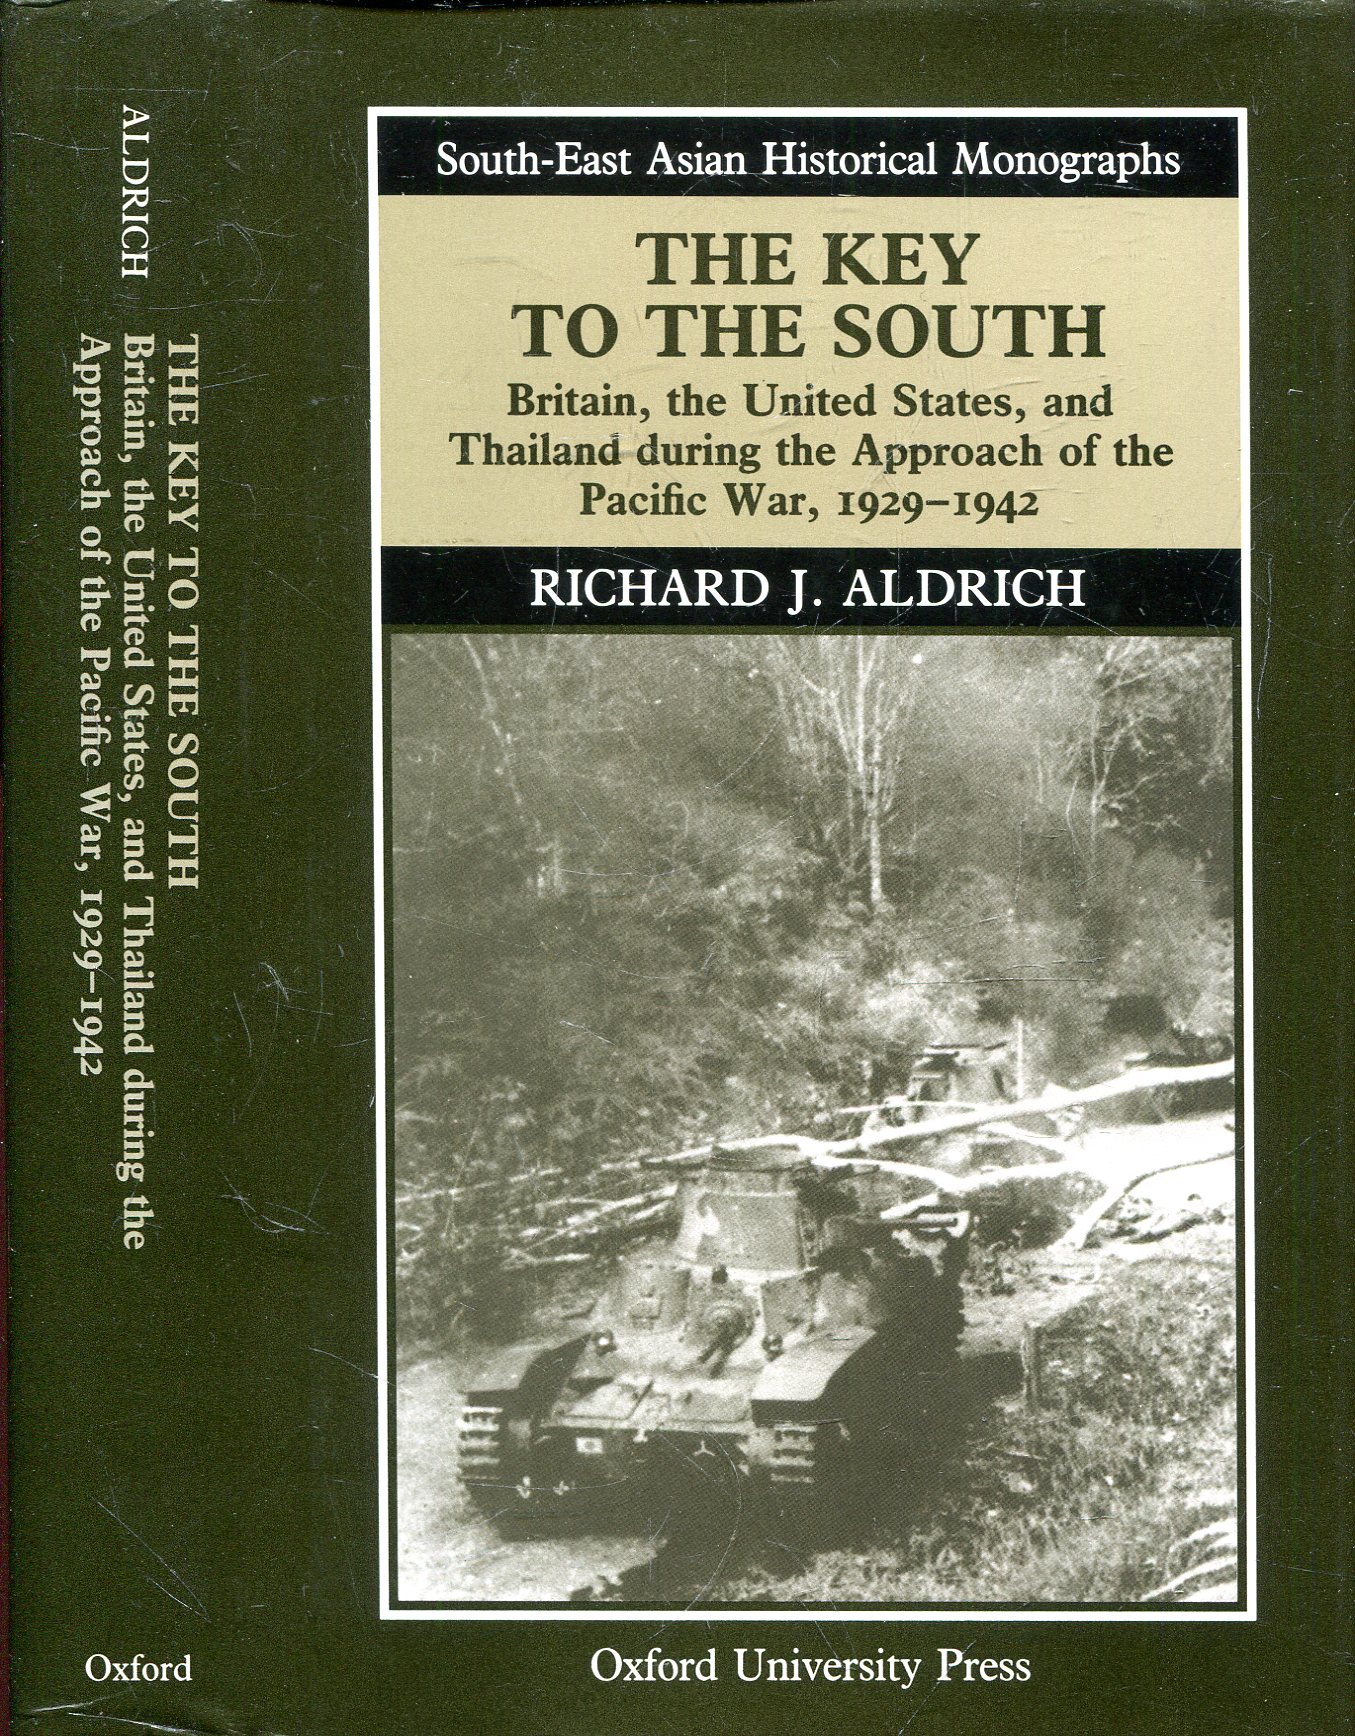 Image for The Key to the South: Britain, the United States, and Thailand during the Approach of the Pacific War, 1929-1942 (South-East Asian Historical Monographs)